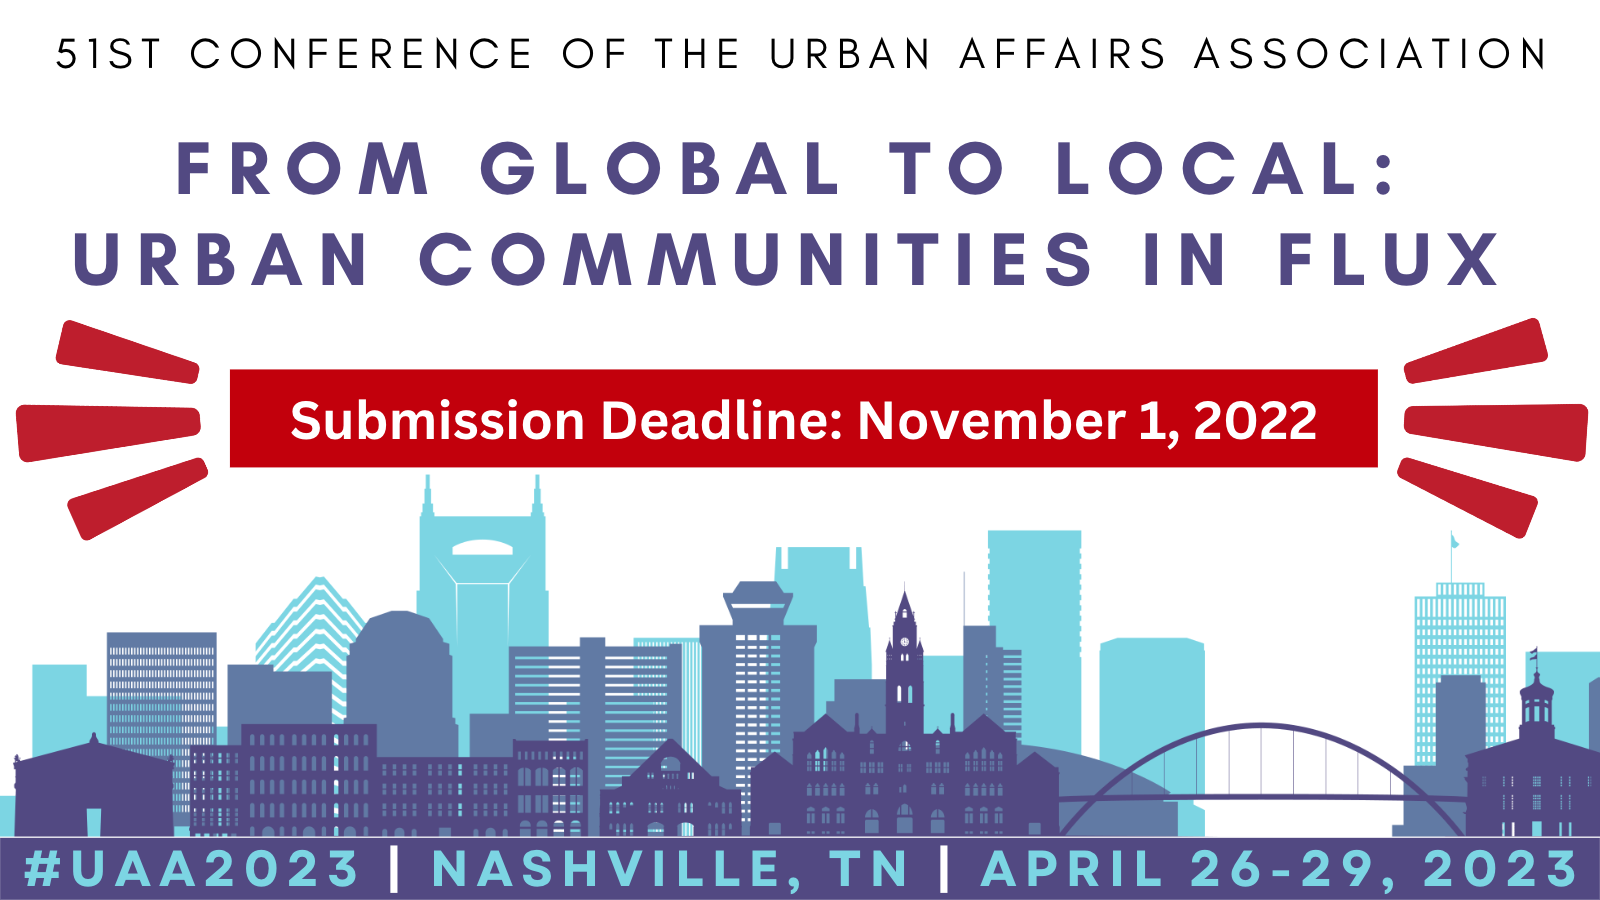 Final reminder: 2023 conference proposals are due 11/1/22